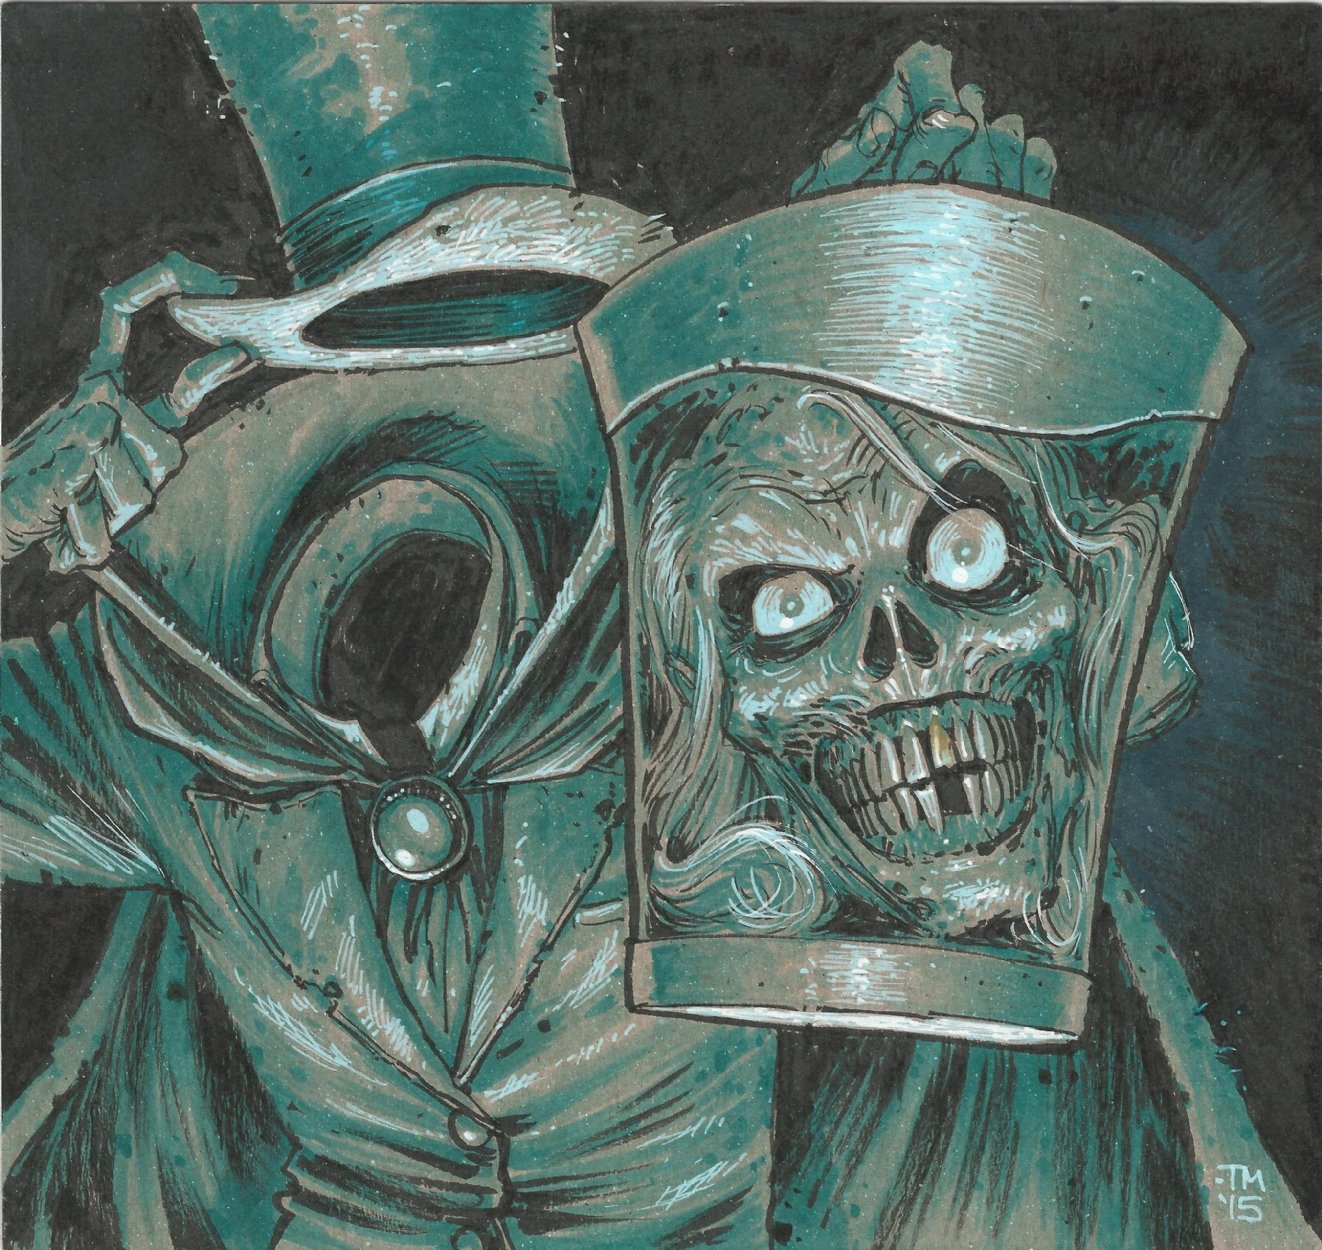 PHOTOS: 'Haunted Mansion' Hatbox Ghost Sipper Materializes in